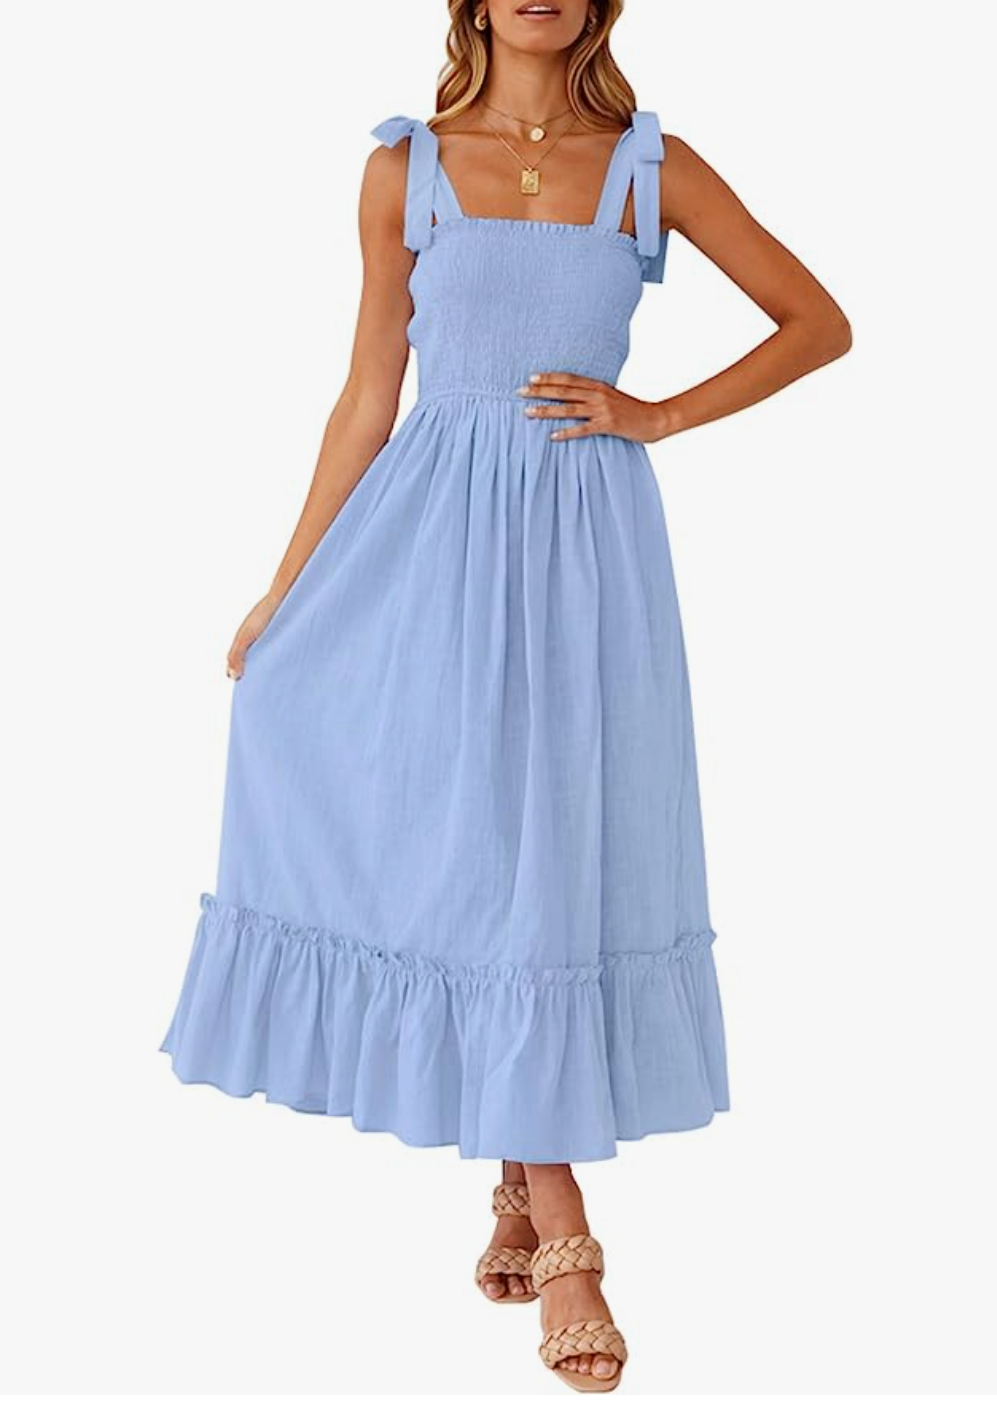 4 Amazon Resort Wear Finds that Work as Work Dresses and Party Clothes